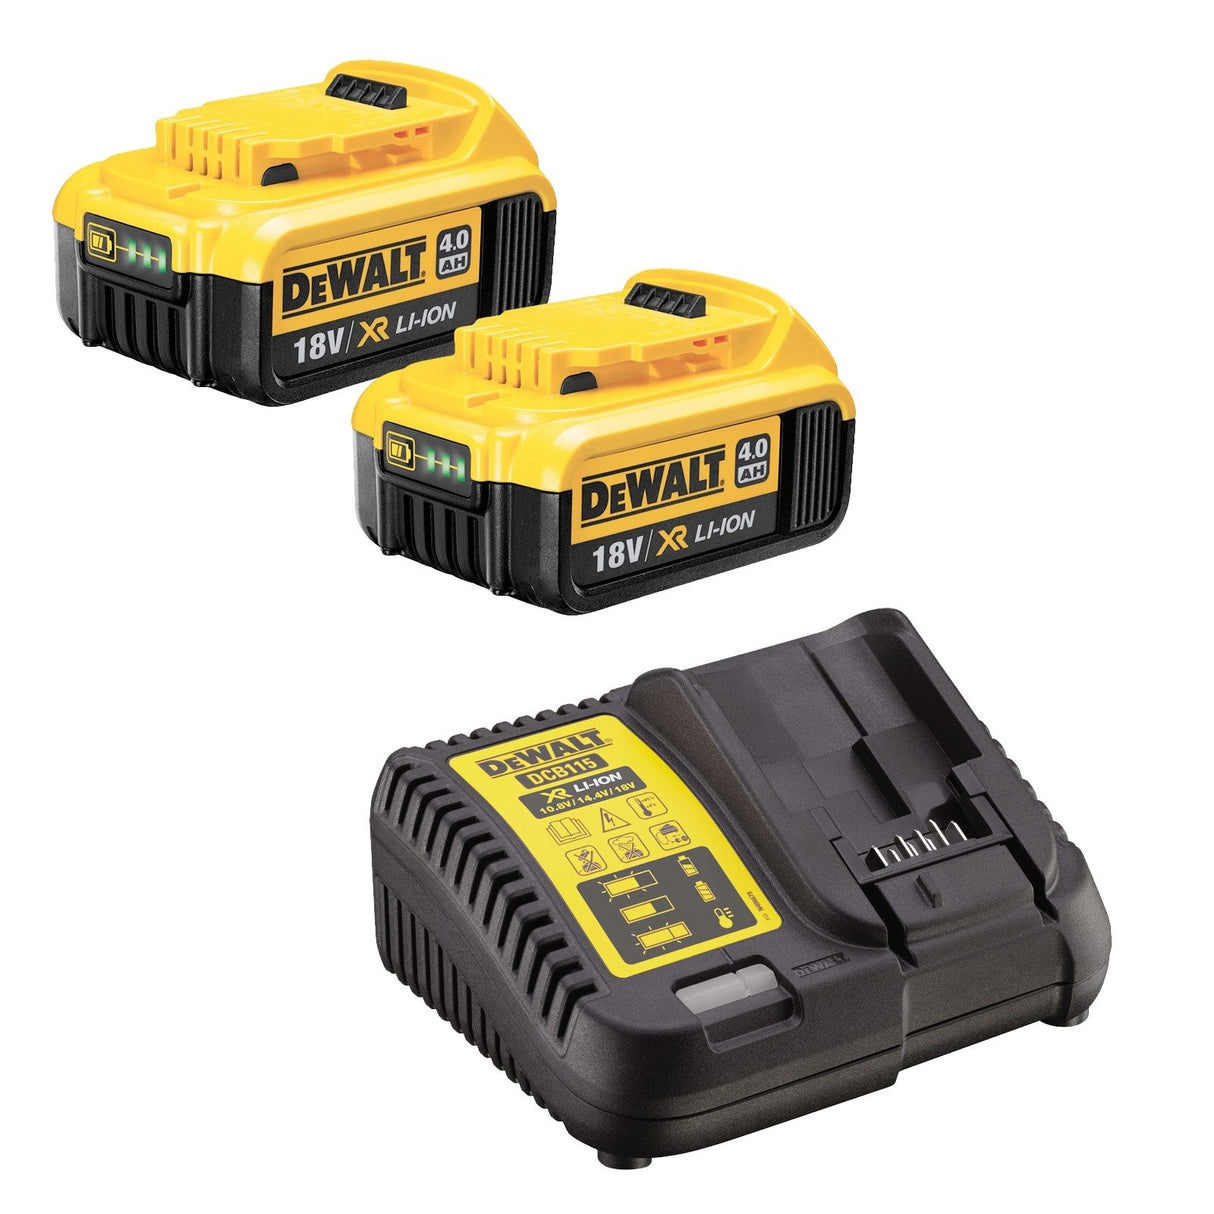 DeWalt DCD796M1 18V XR Brushless Compact Combi Drill, 4Ah Lithium-Ion Battery & Charger